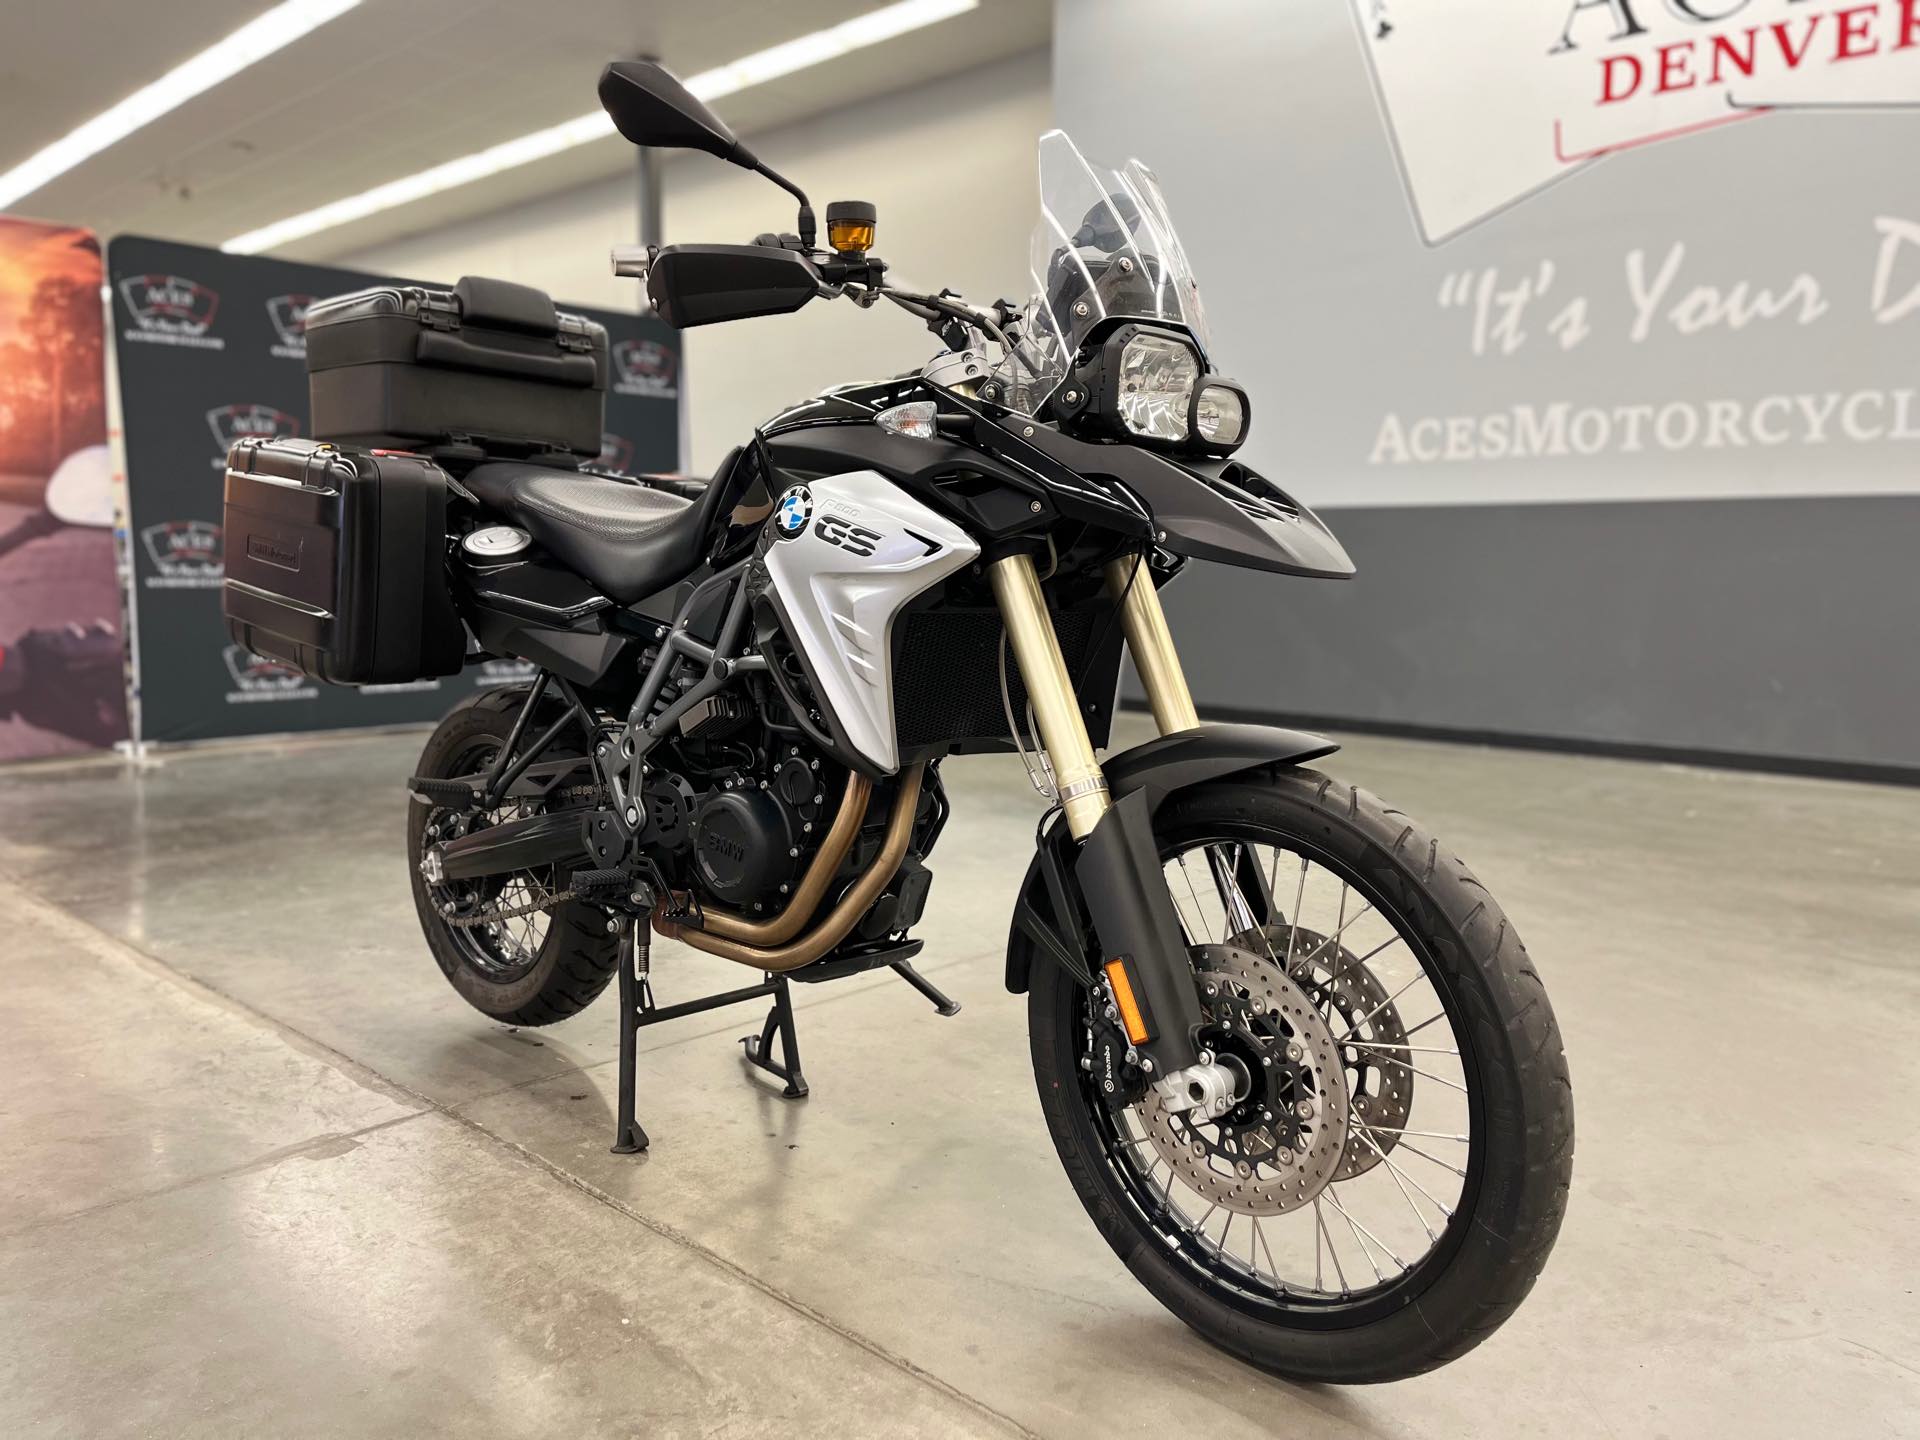 2017 BMW F 800 GS at Aces Motorcycles - Denver